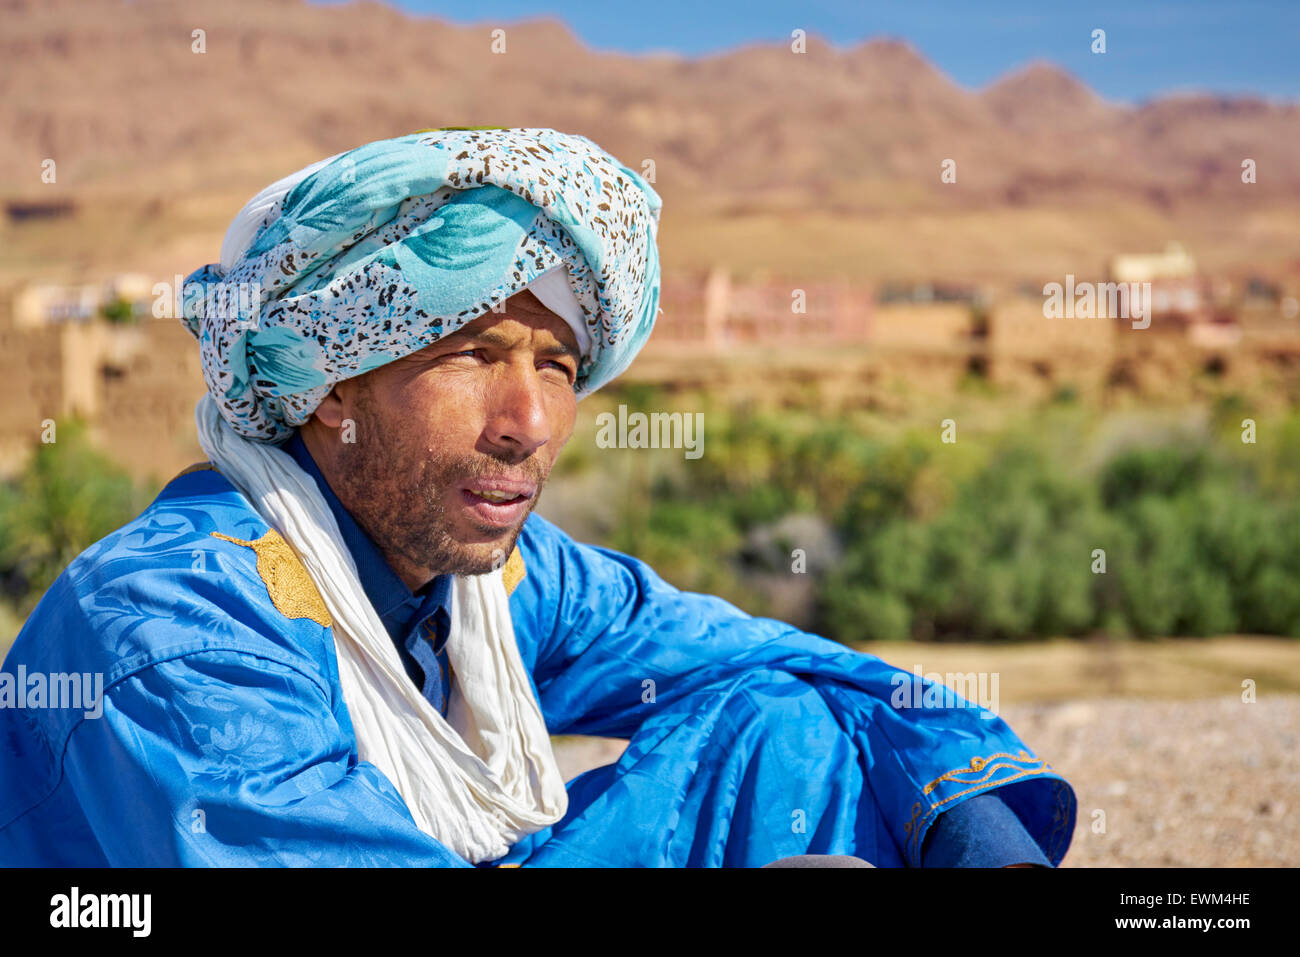 Berber man wearing a turban, portrait, Dades Valley, Morocco Stock Photo